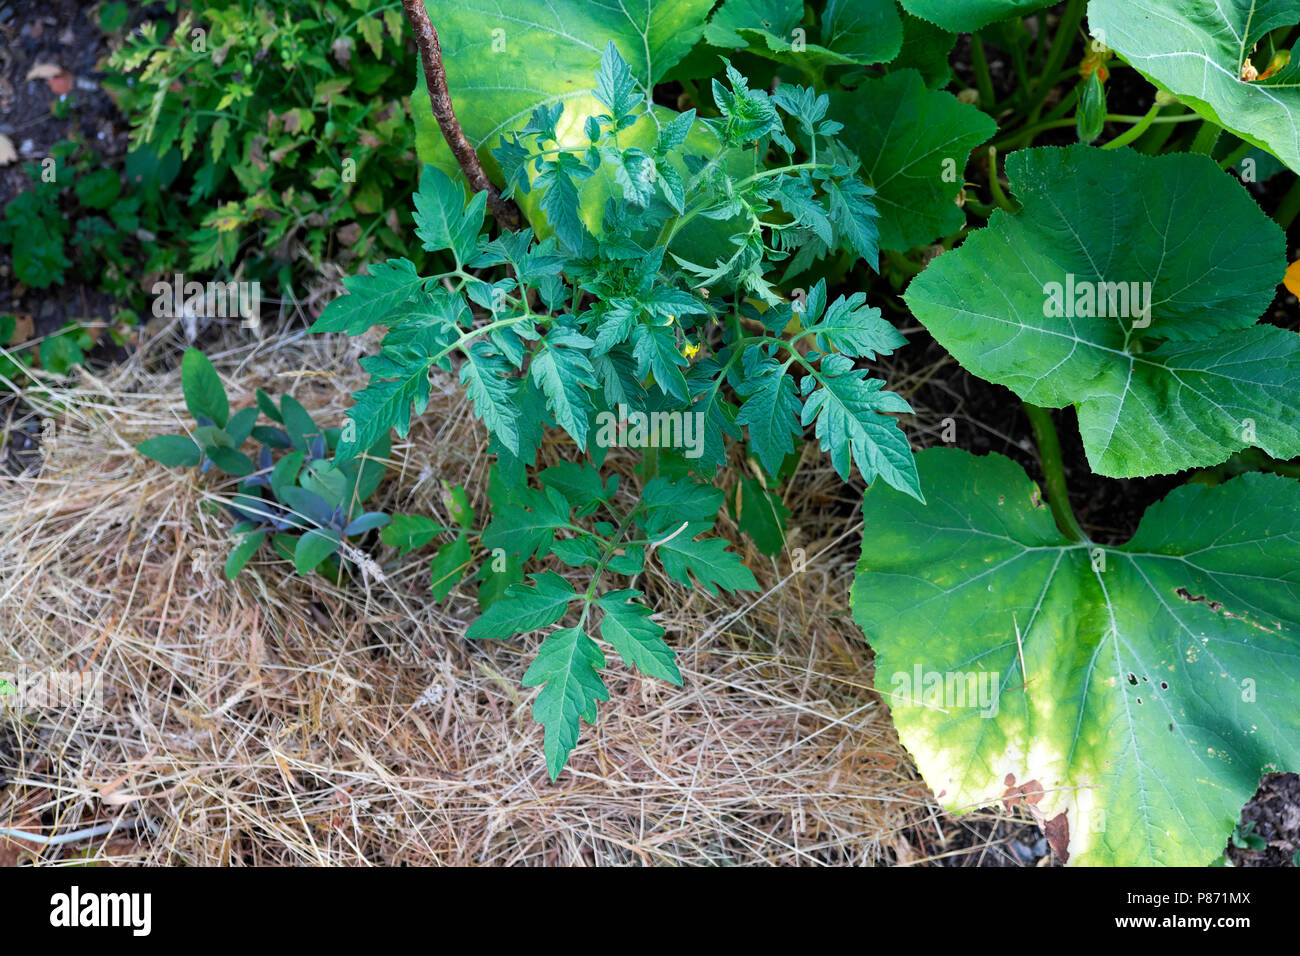 Mulching on tomato plant in the garden to retain water and stop wilting in the heatwave of summer July 2018 in West Wales UK   KATHY DEWITT Stock Photo